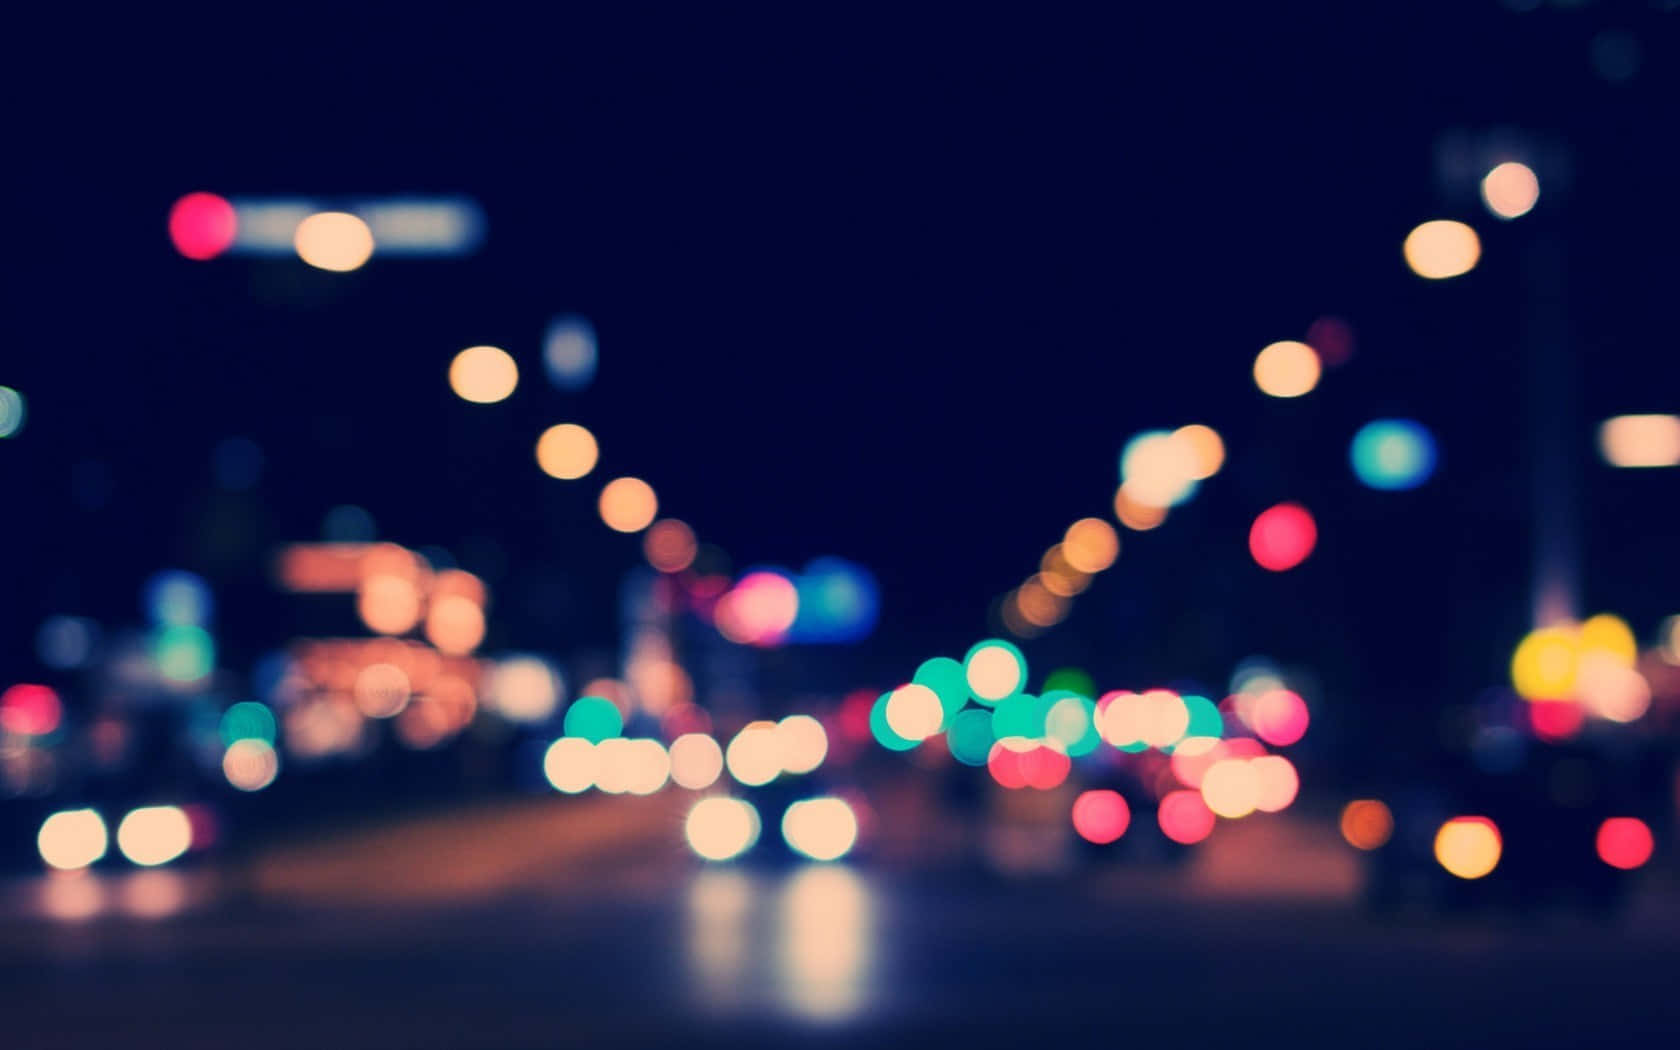 A Blurry Image Of A City Street At Night